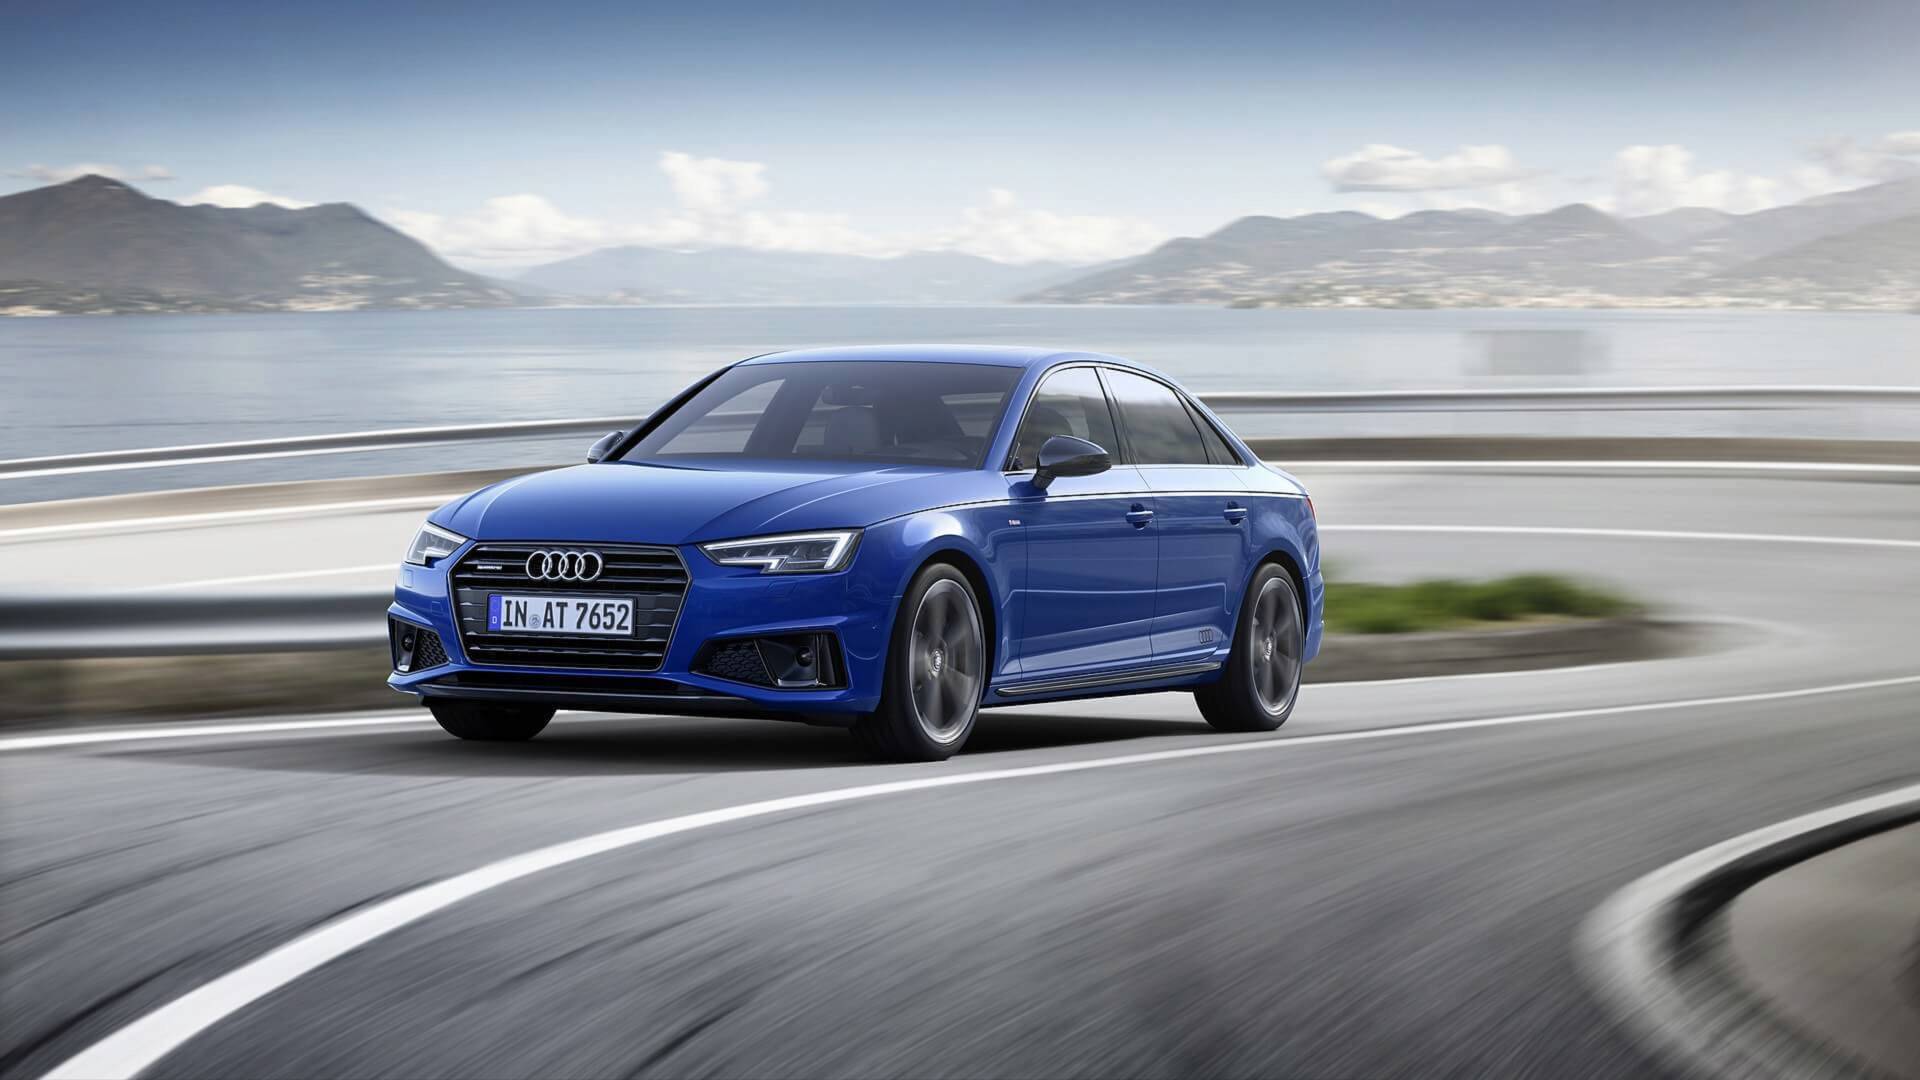 2019 Audi A4 Facelift Doesn't Look All That Different From ...